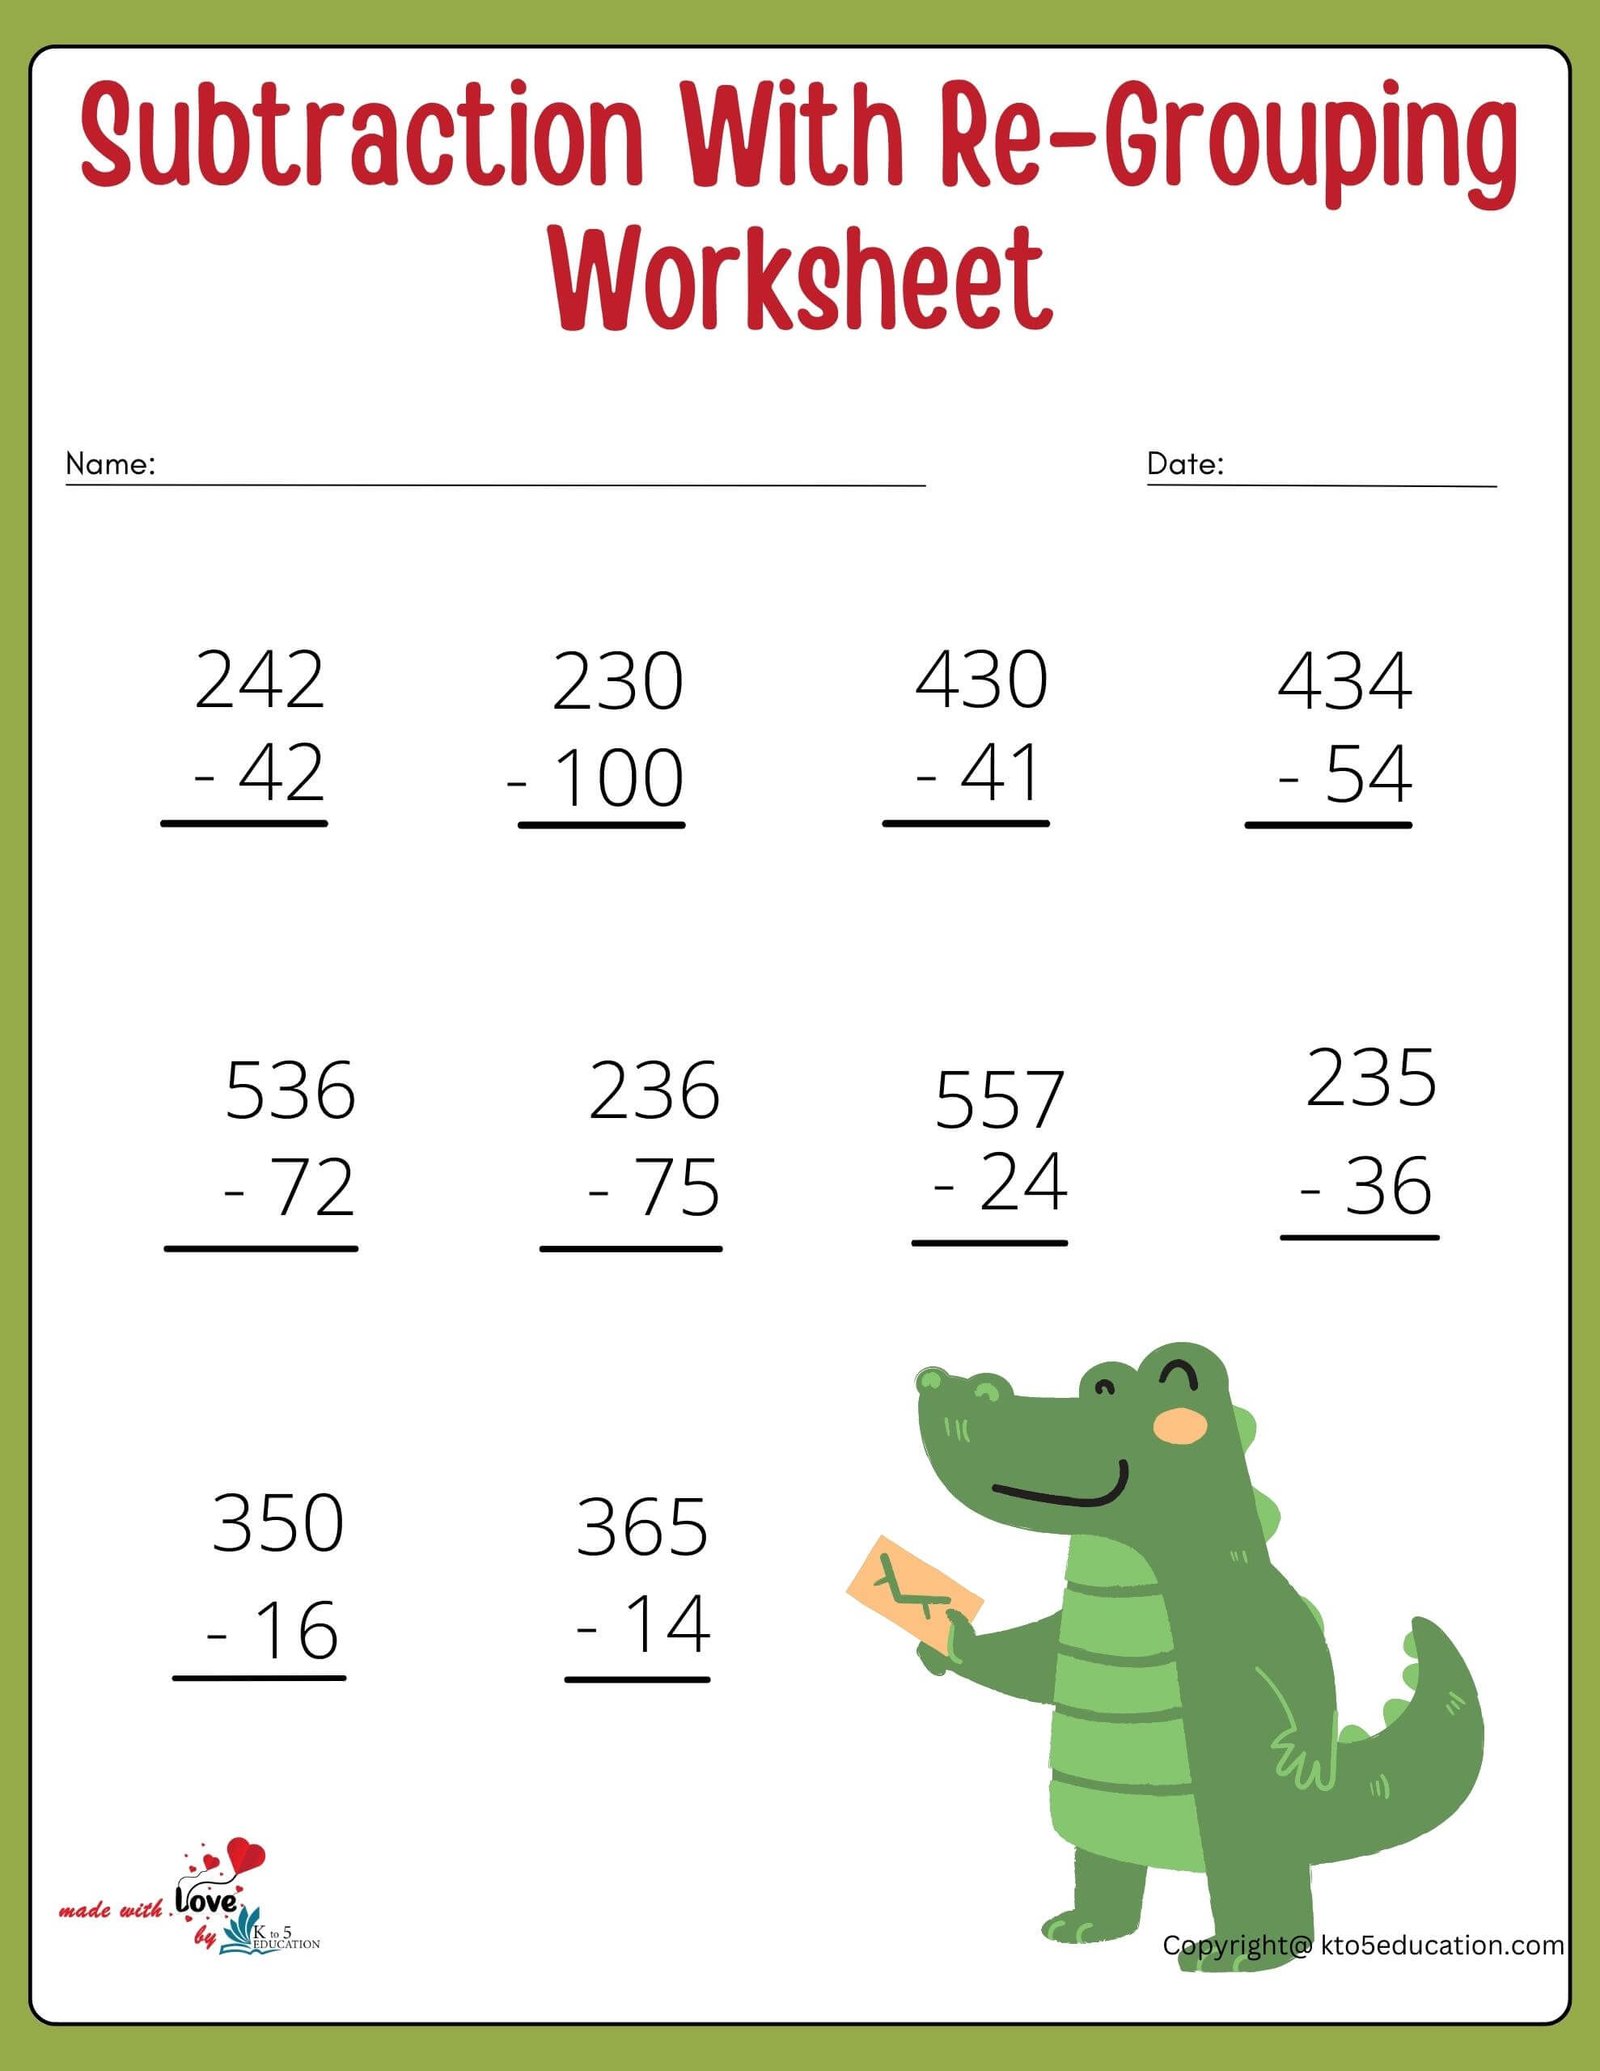 Free Subtraction With Re-Grouping Worksheets For Kids